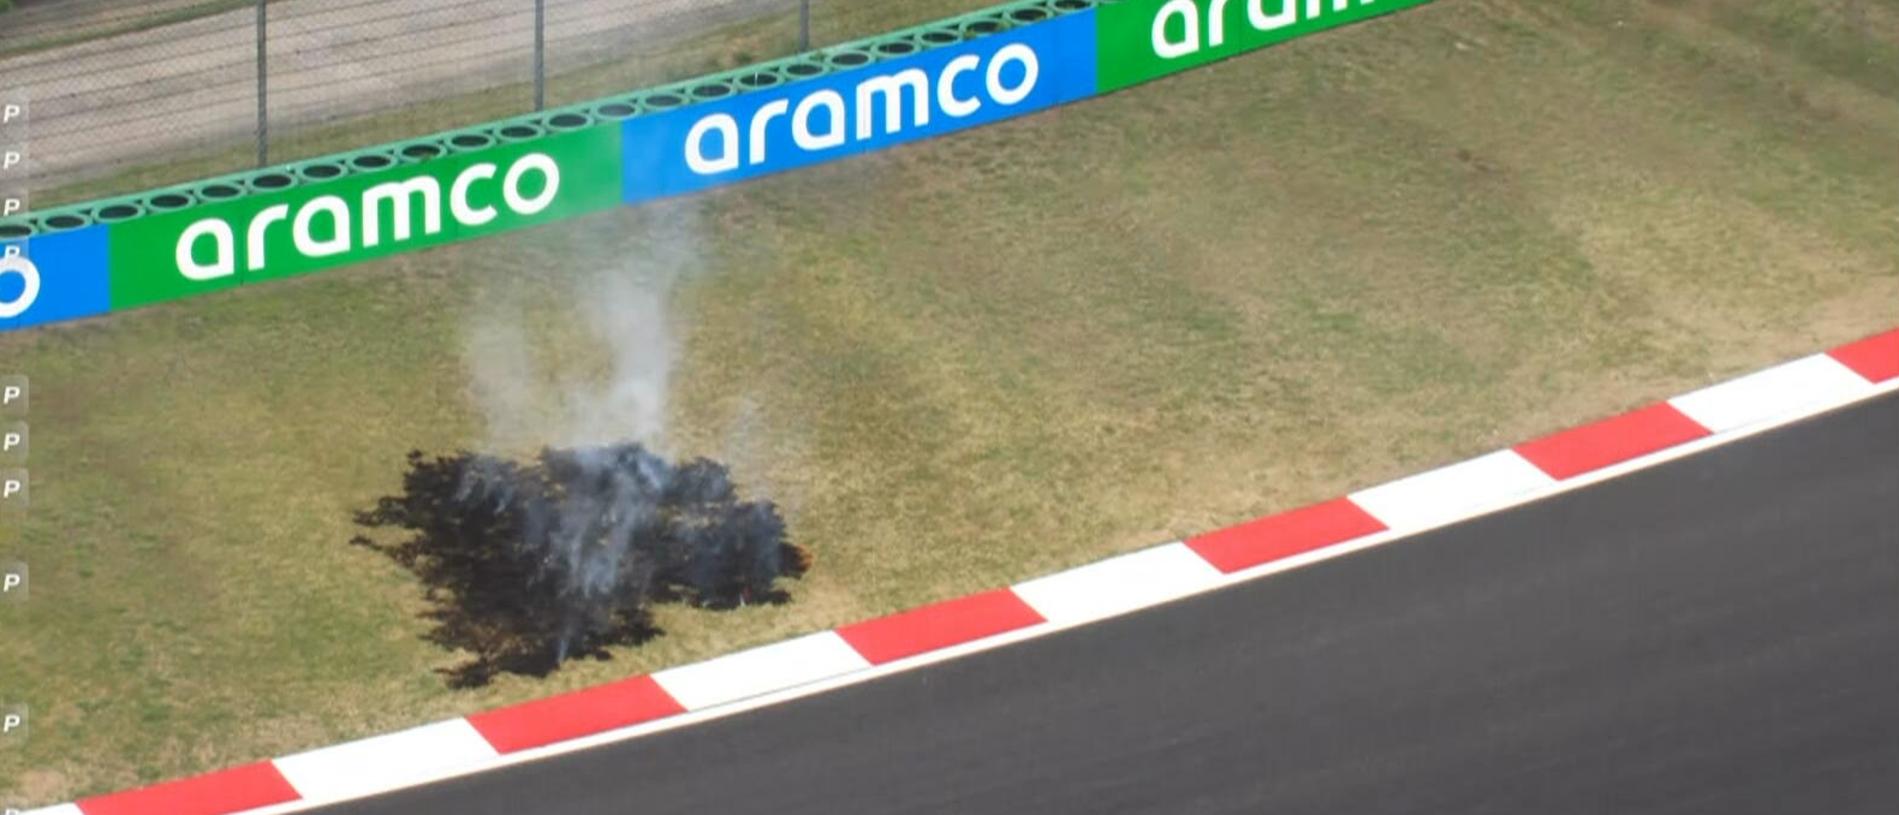 Grass catches fire in Chinese Grand Prix.